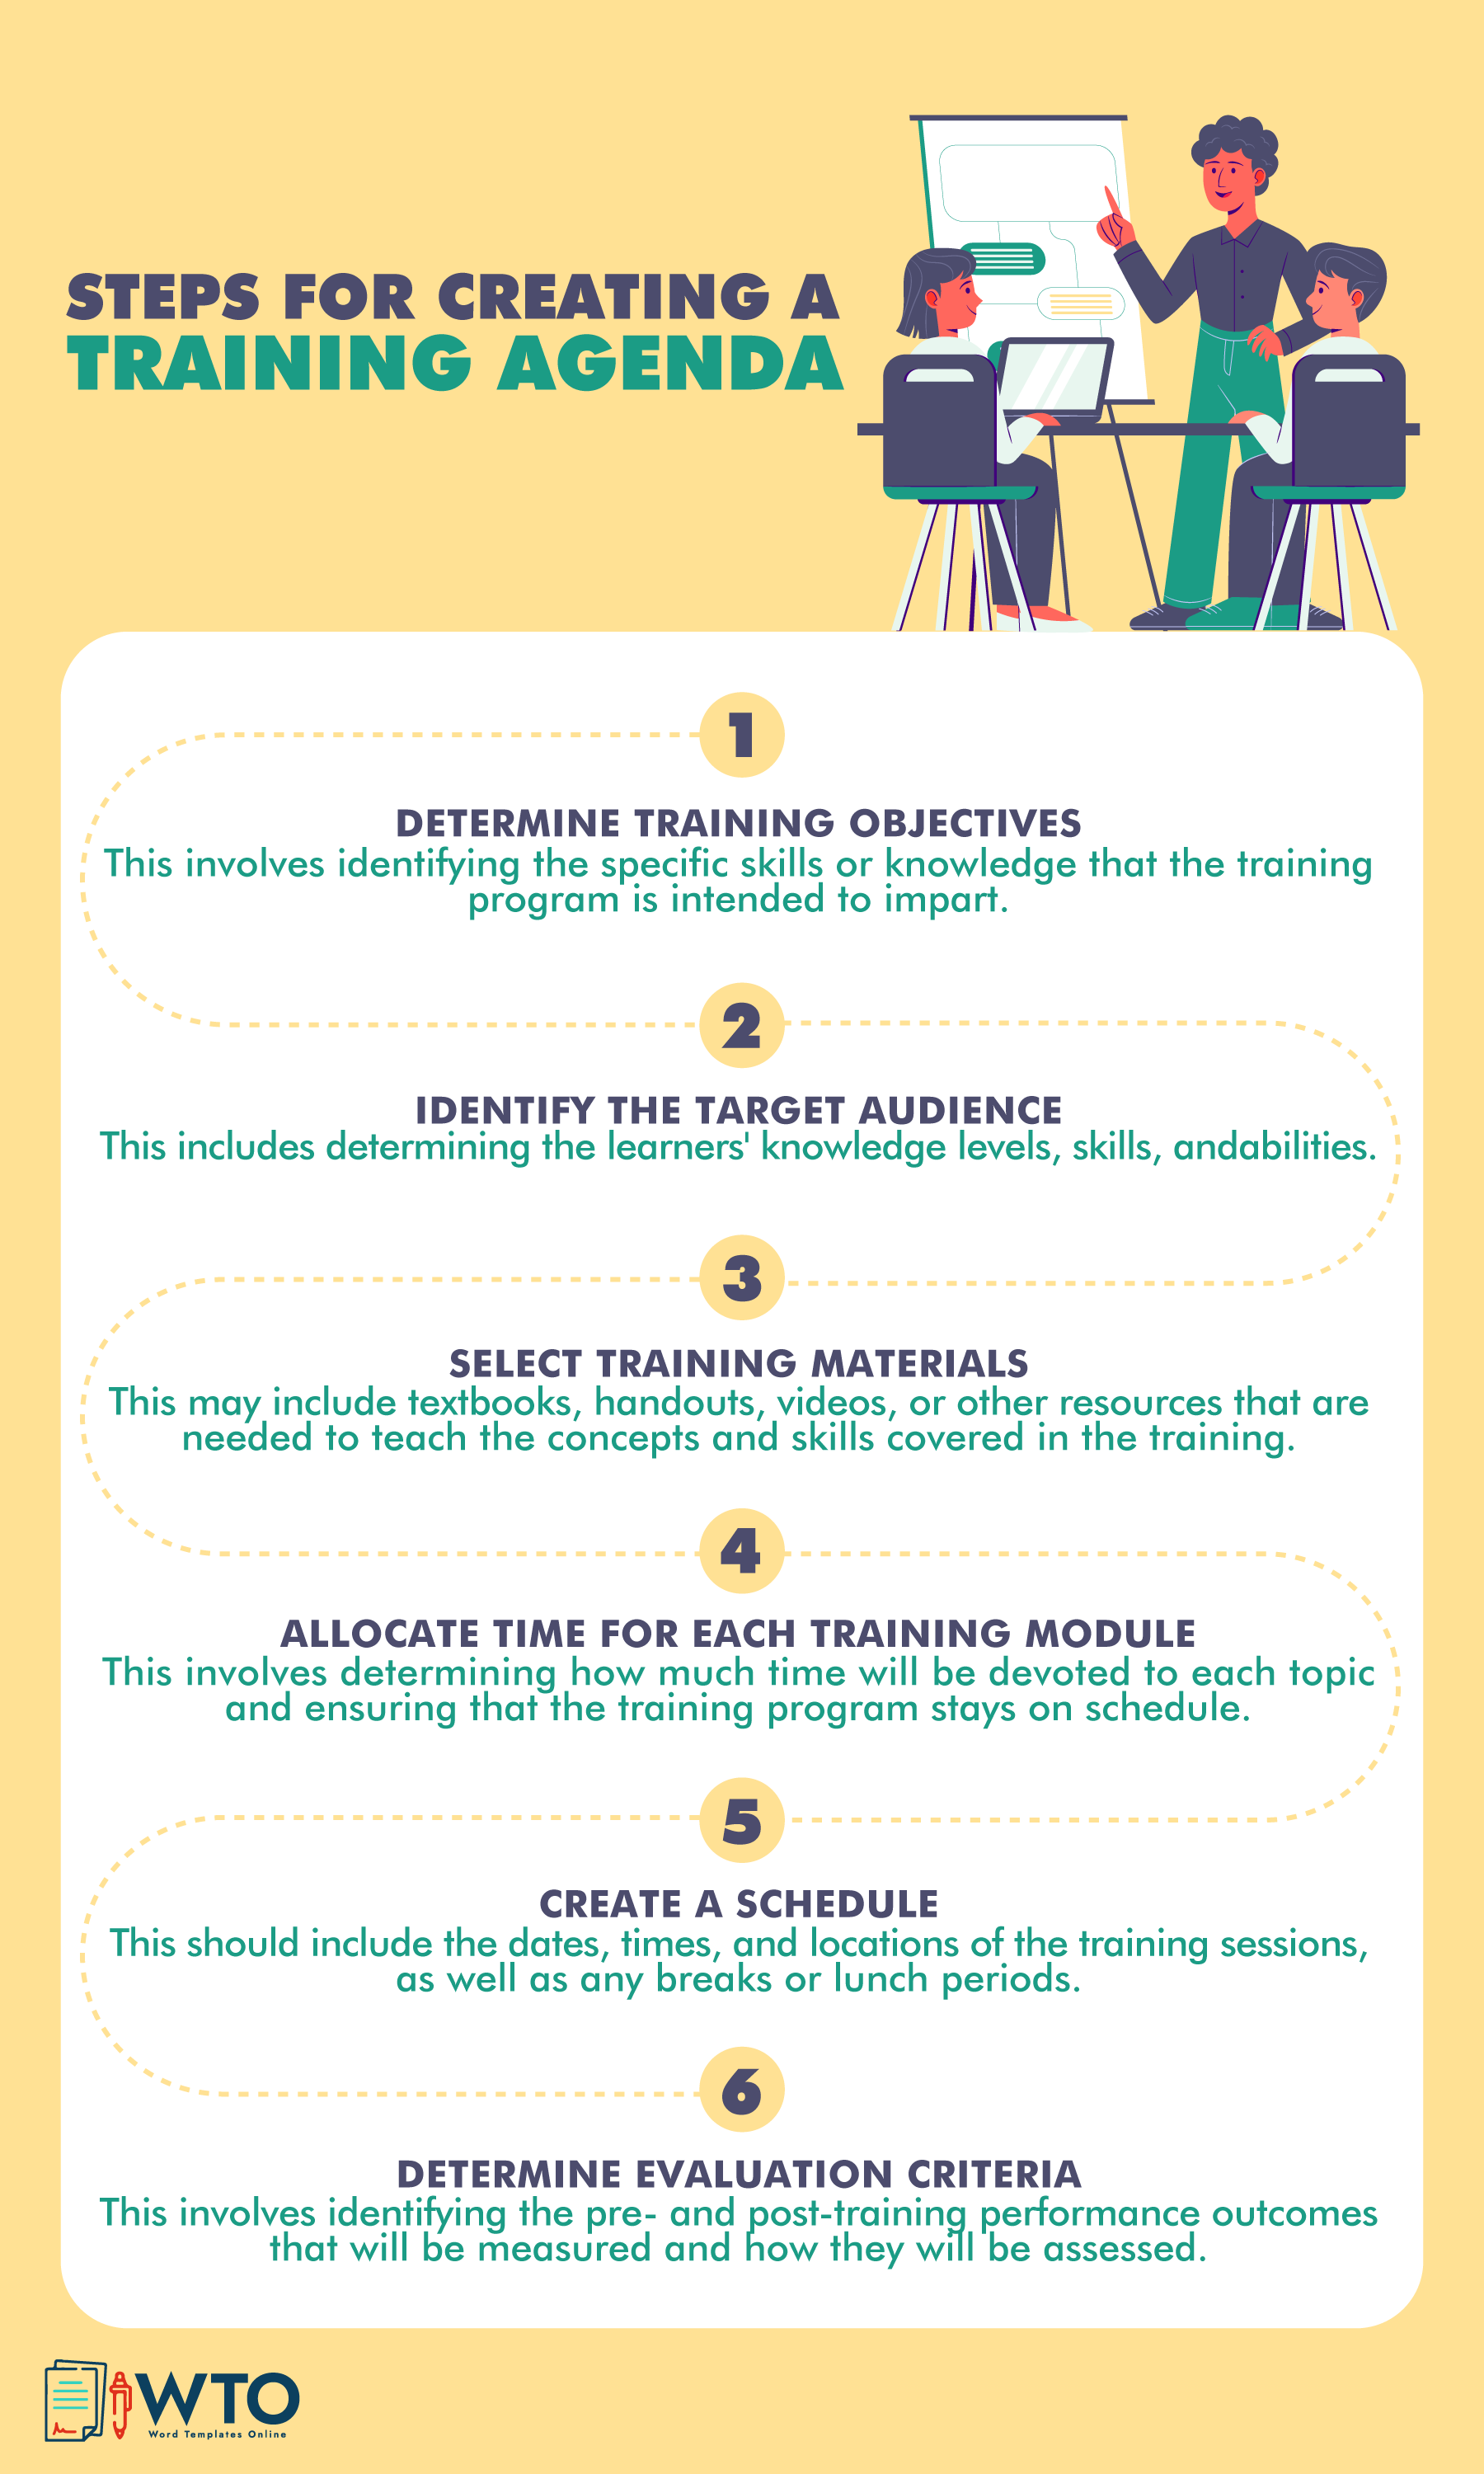 This infographic is about the steps involved in creating a training agenda.